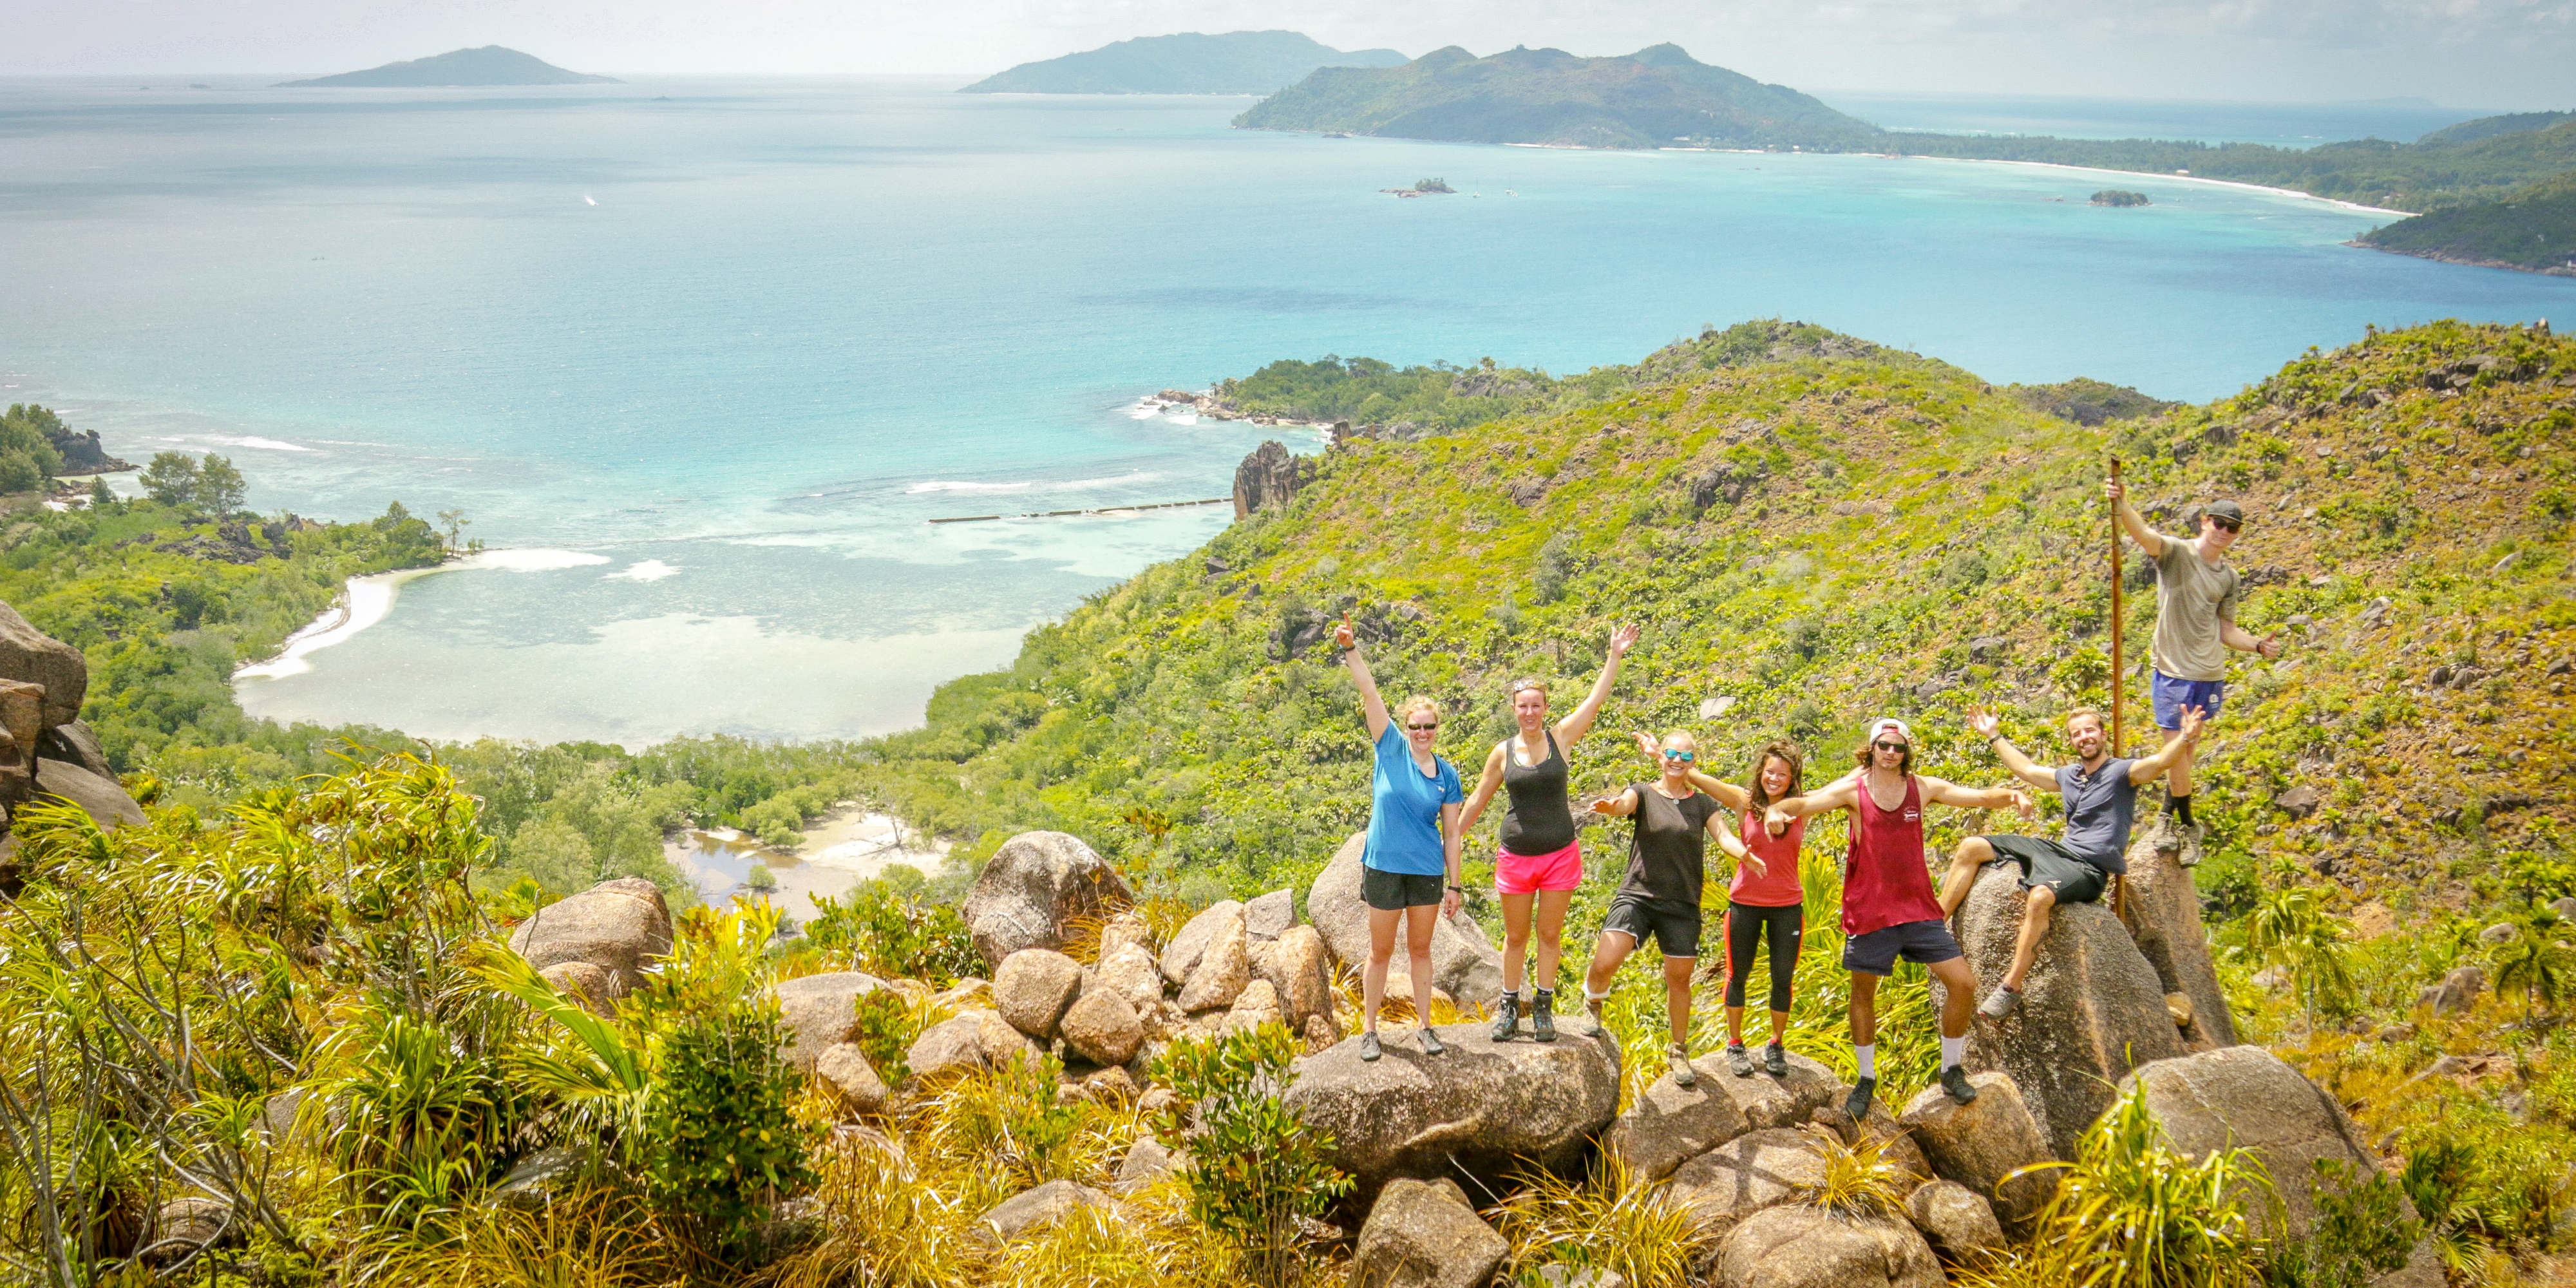 GVI participants enjoy the view from the summit of Curieuse Island while volunteering in Seychelles.